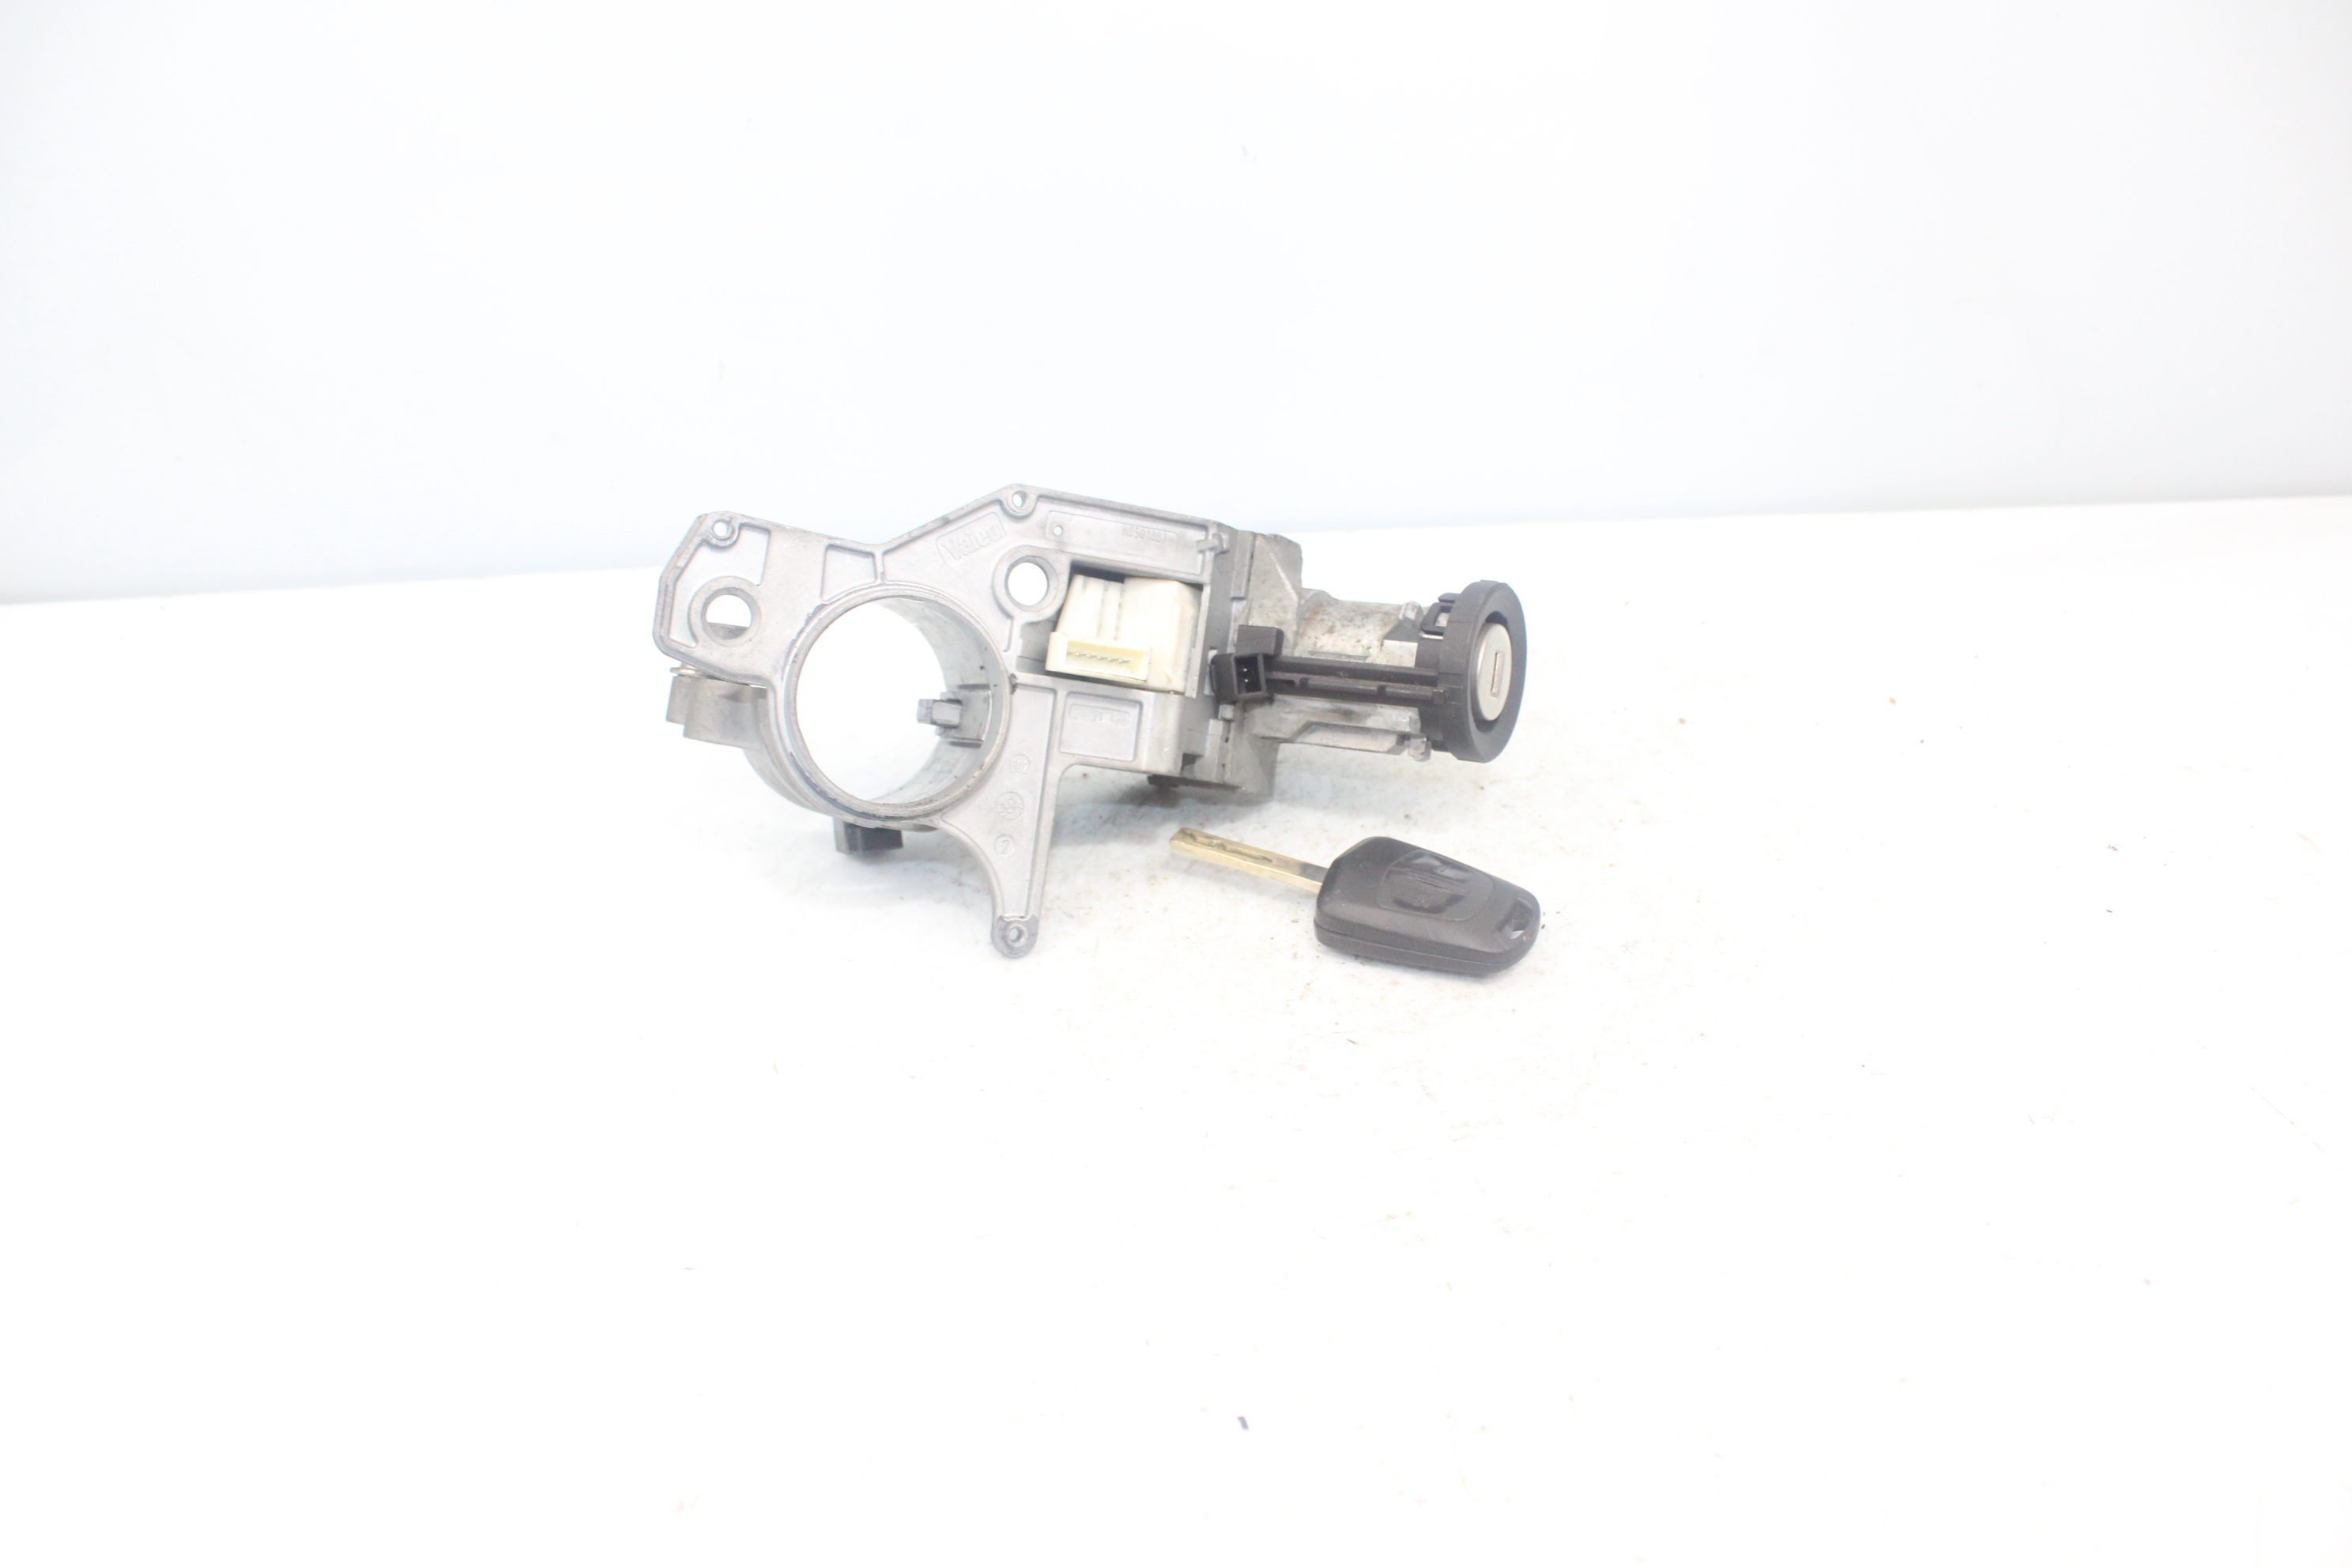 OPEL Astra H (2004-2014) Ignition Lock N0501881 25180035